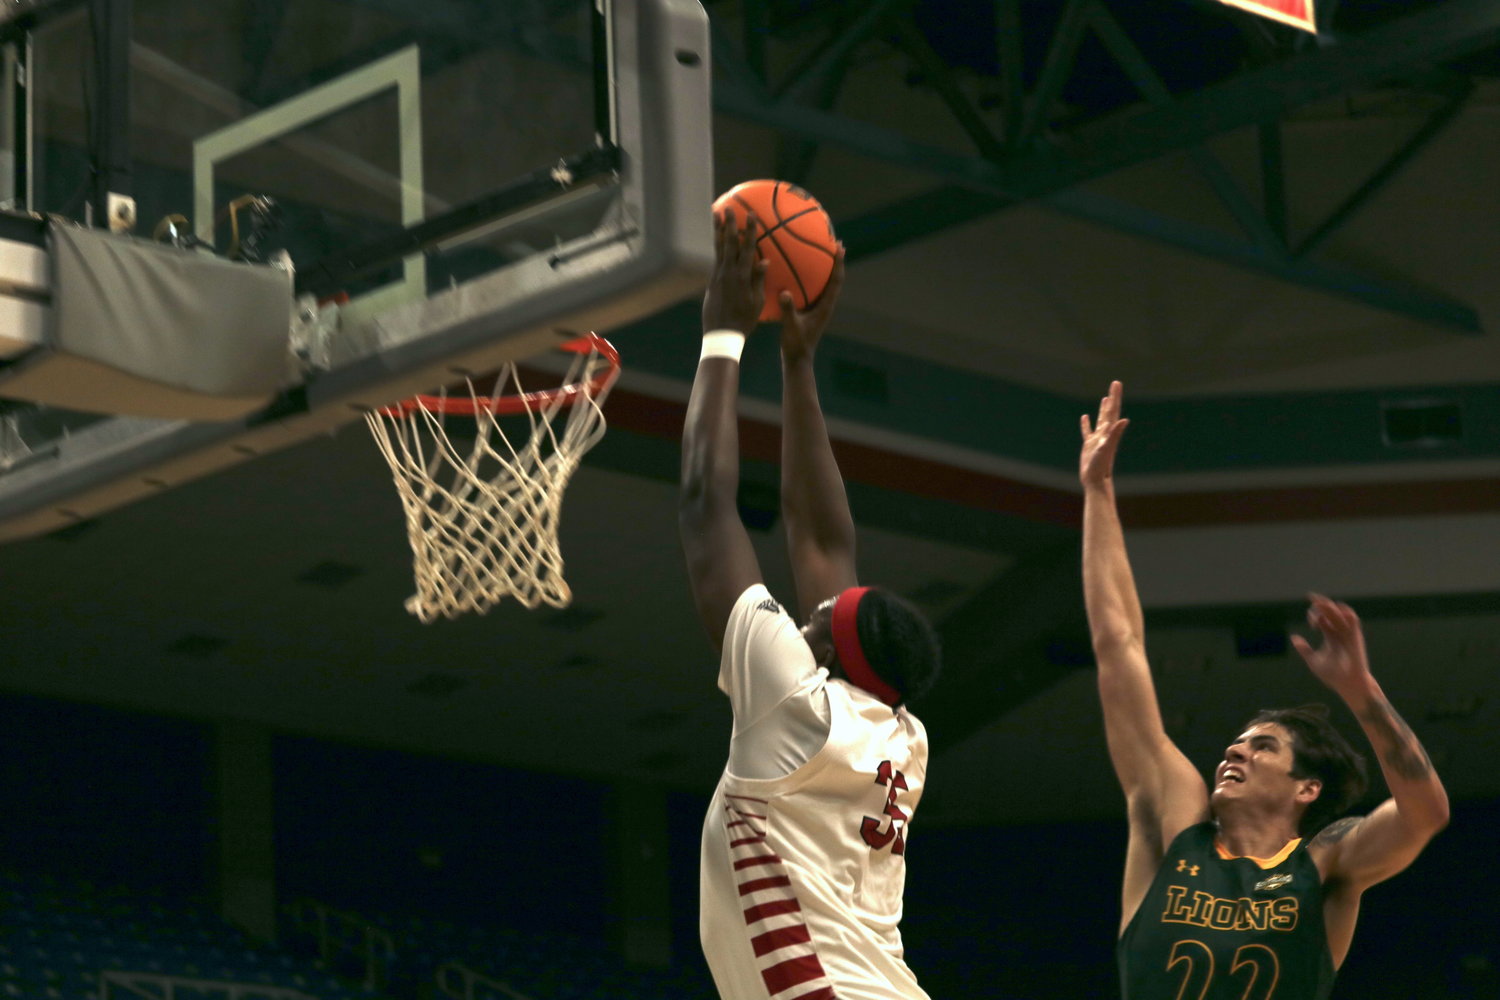 Ryghe Lyons goes up for a dunk attempt during Saturdays Southland Tip-Off Final between Southeastern Louisiana University and Nicholls State University at the Merrell Center.